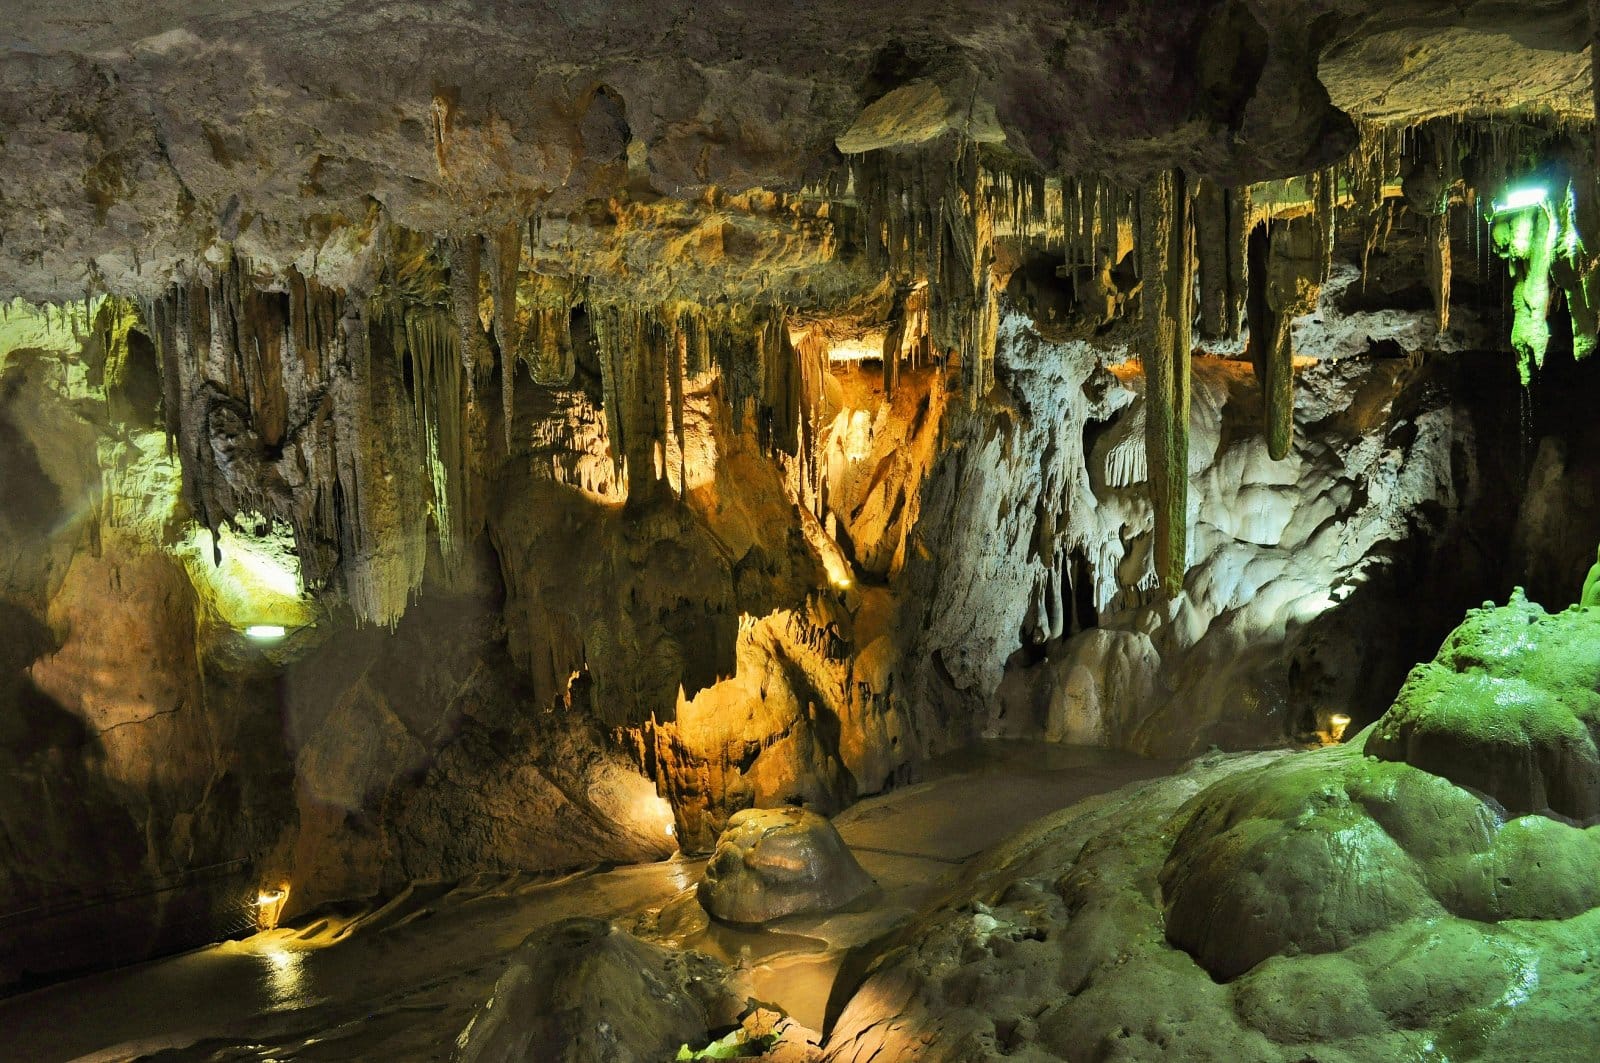 <p class="wp-caption-text">Image Credit: Pexels / Skitterphoto</p>  <p><span>The Mulu Caves, located within Gunung Mulu National Park in Malaysian Borneo, represent one of the most spectacular cave systems in the world. This UNESCO World Heritage site is renowned for its biodiversity, stunning karst formations, and colossal cave chambers, including Sarawak Chamber, one of the largest by volume on Earth.</span></p> <p><span>The park encompasses a variety of cave types, from show caves with easy access to the more challenging adventure caves, offering something for every level of explorer. The Clearwater Cave system, with its extensive network of rivers and springs, is another highlight, showcasing the dynamic relationship between water and limestone in shaping the landscape.</span></p> <p><span>The exploration of Mulu Caves is as much an ecological adventure as it is a physical one, with the surrounding rainforest teeming with life, including endemic species and rare flora. The caves are home to millions of bats and swiftlets, whose daily exodus at dusk is a natural spectacle.</span></p> <p><b>Insider’s Tip: </b><span>While some caves are accessible to casual tourists, the more adventurous expeditions require high fitness and caving expertise. Booking a guided tour through the park’s management is recommended to ensure a safe and informative experience.</span></p> <p><b>When to Travel: </b><span>The dry season from June to September is the best time to visit, offering more predictable weather conditions and lower water levels in the caves.</span></p> <p><b>How to Get There: </b><span>The nearest major town is Miri, from where you can take a short flight to Mulu Airport. The park is a short drive from the airport, with various accommodation options available within or near the park boundaries.</span></p>